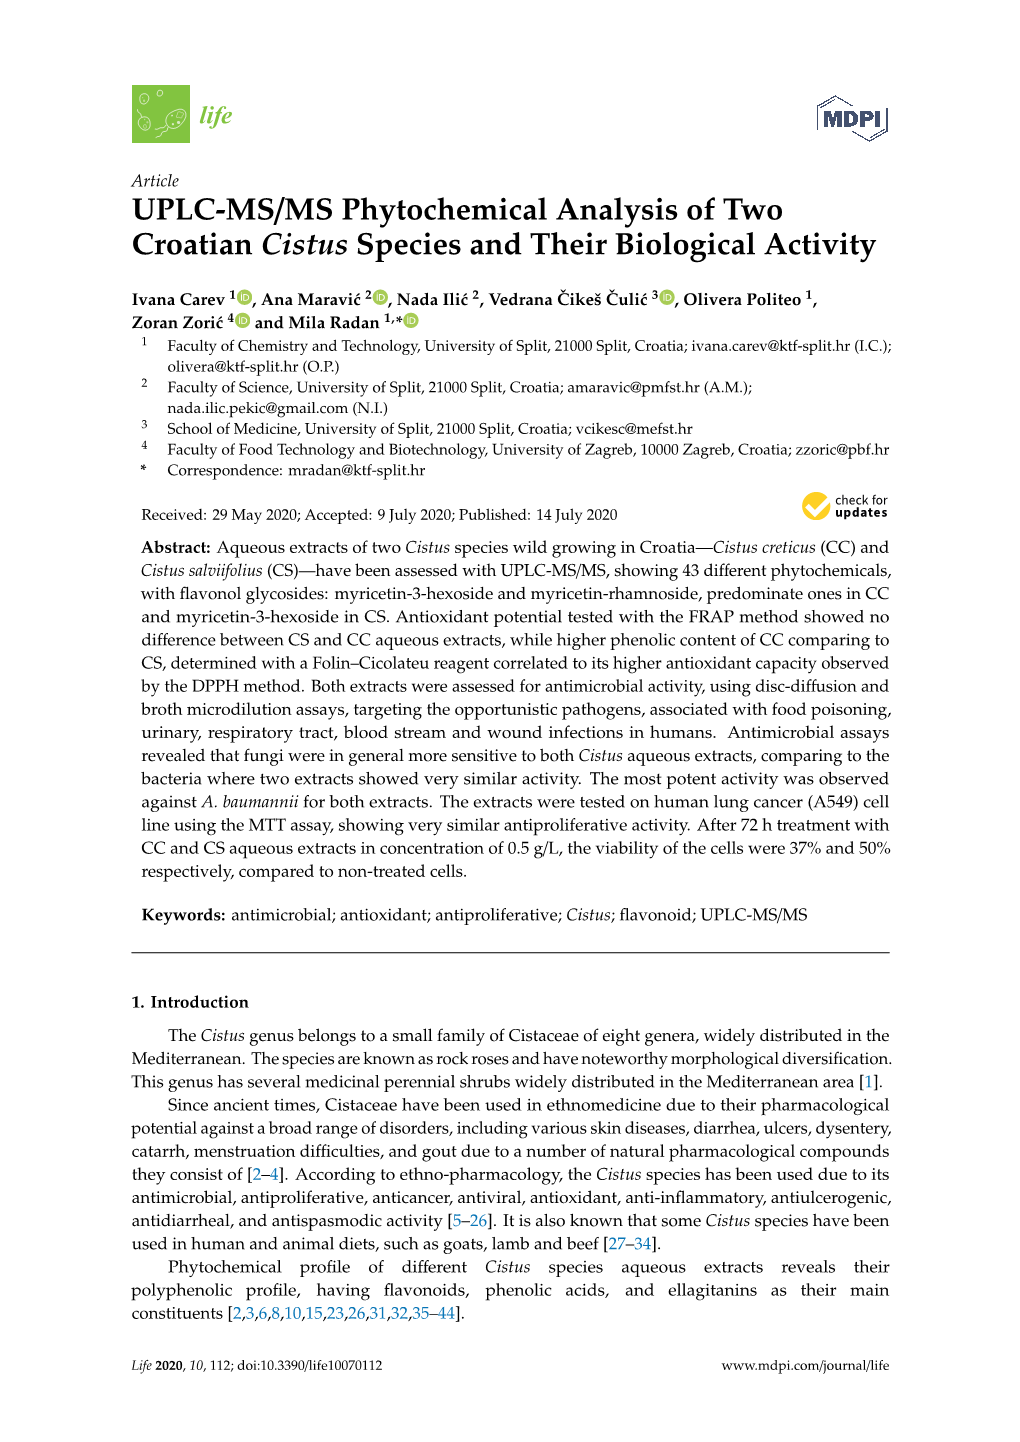 UPLC-MS/MS Phytochemical Analysis of Two Croatian Cistus Species and Their Biological Activity